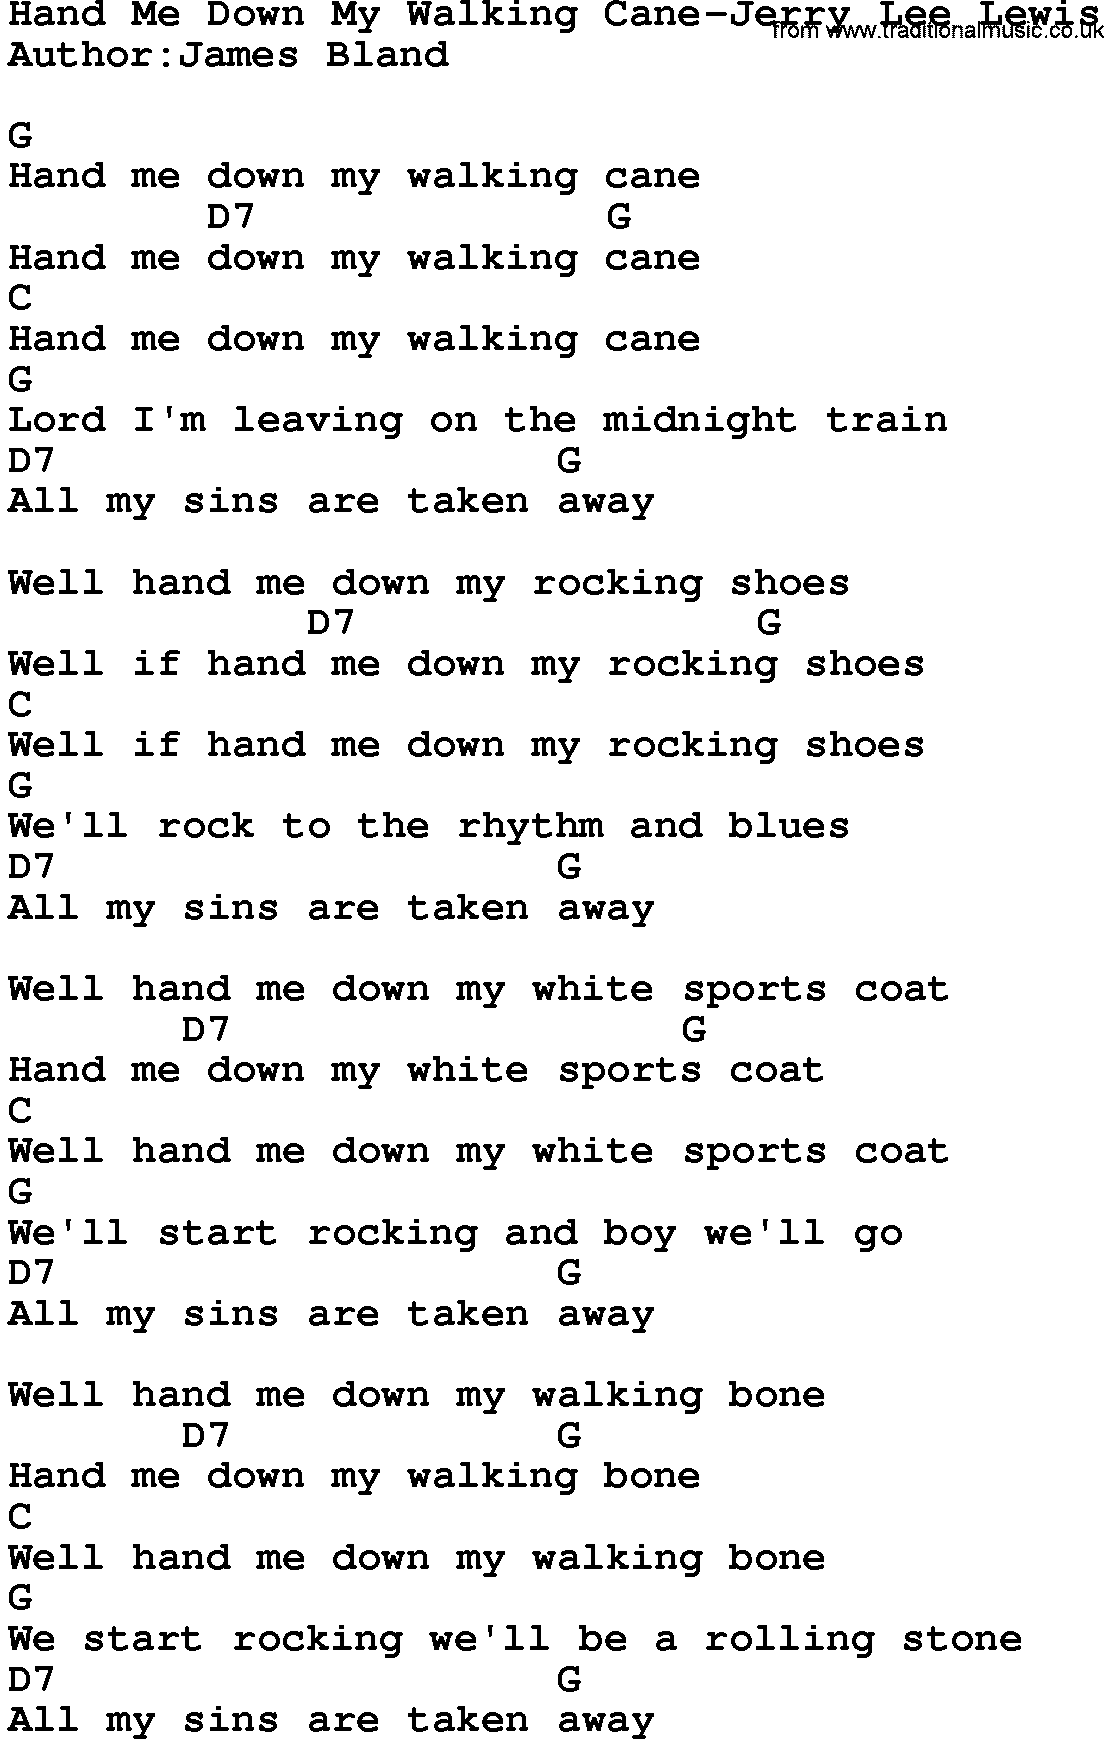 Country music song: Hand Me Down My Walking Cane-Jerry Lee Lewis lyrics and chords